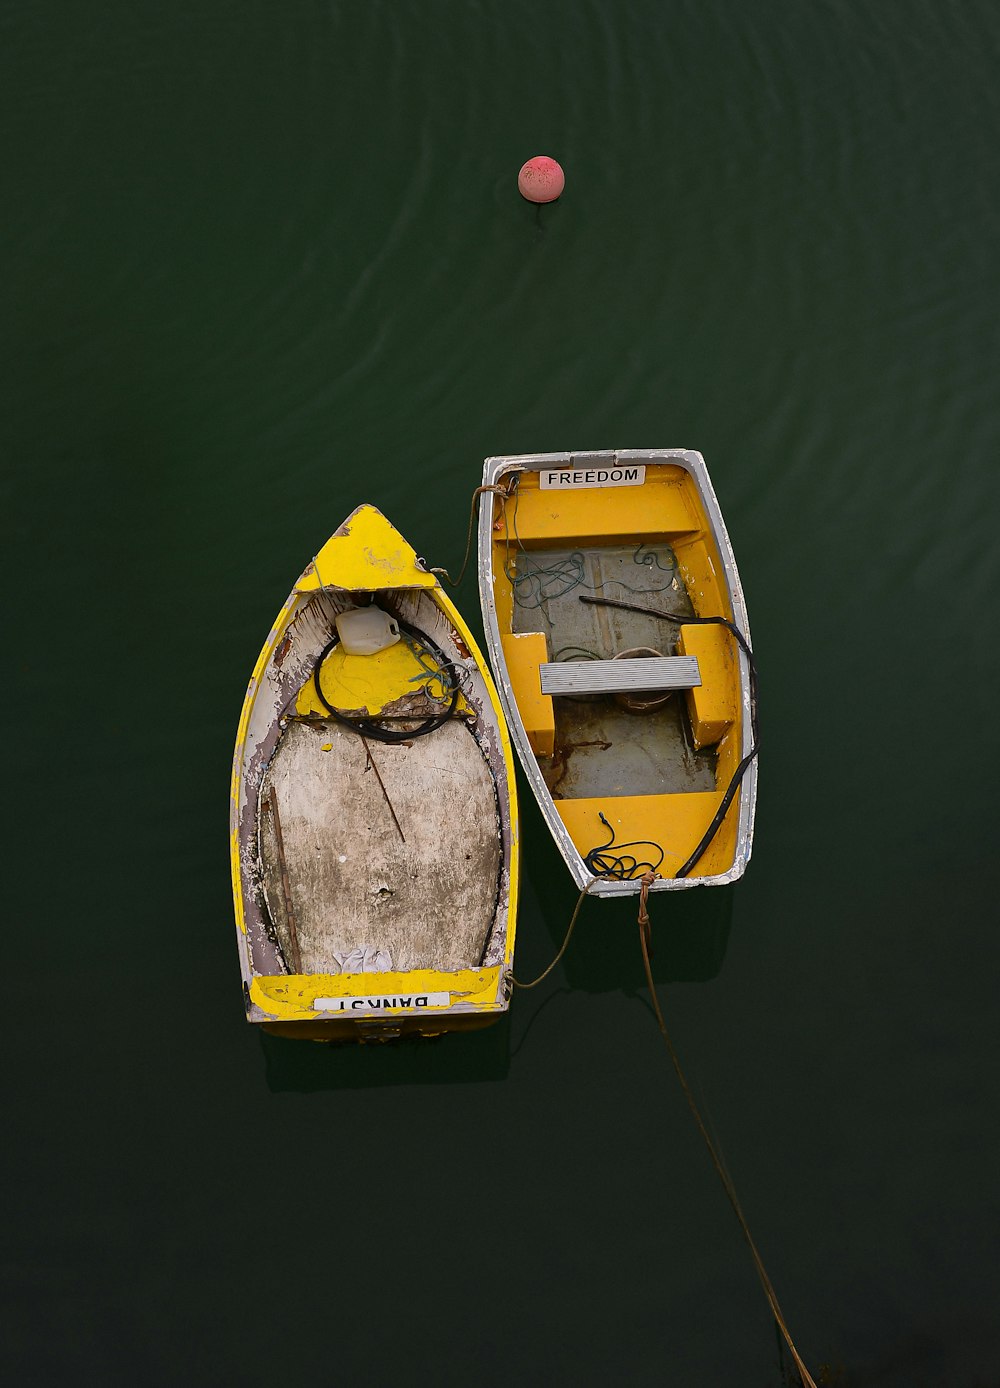 yellow and white boat on water